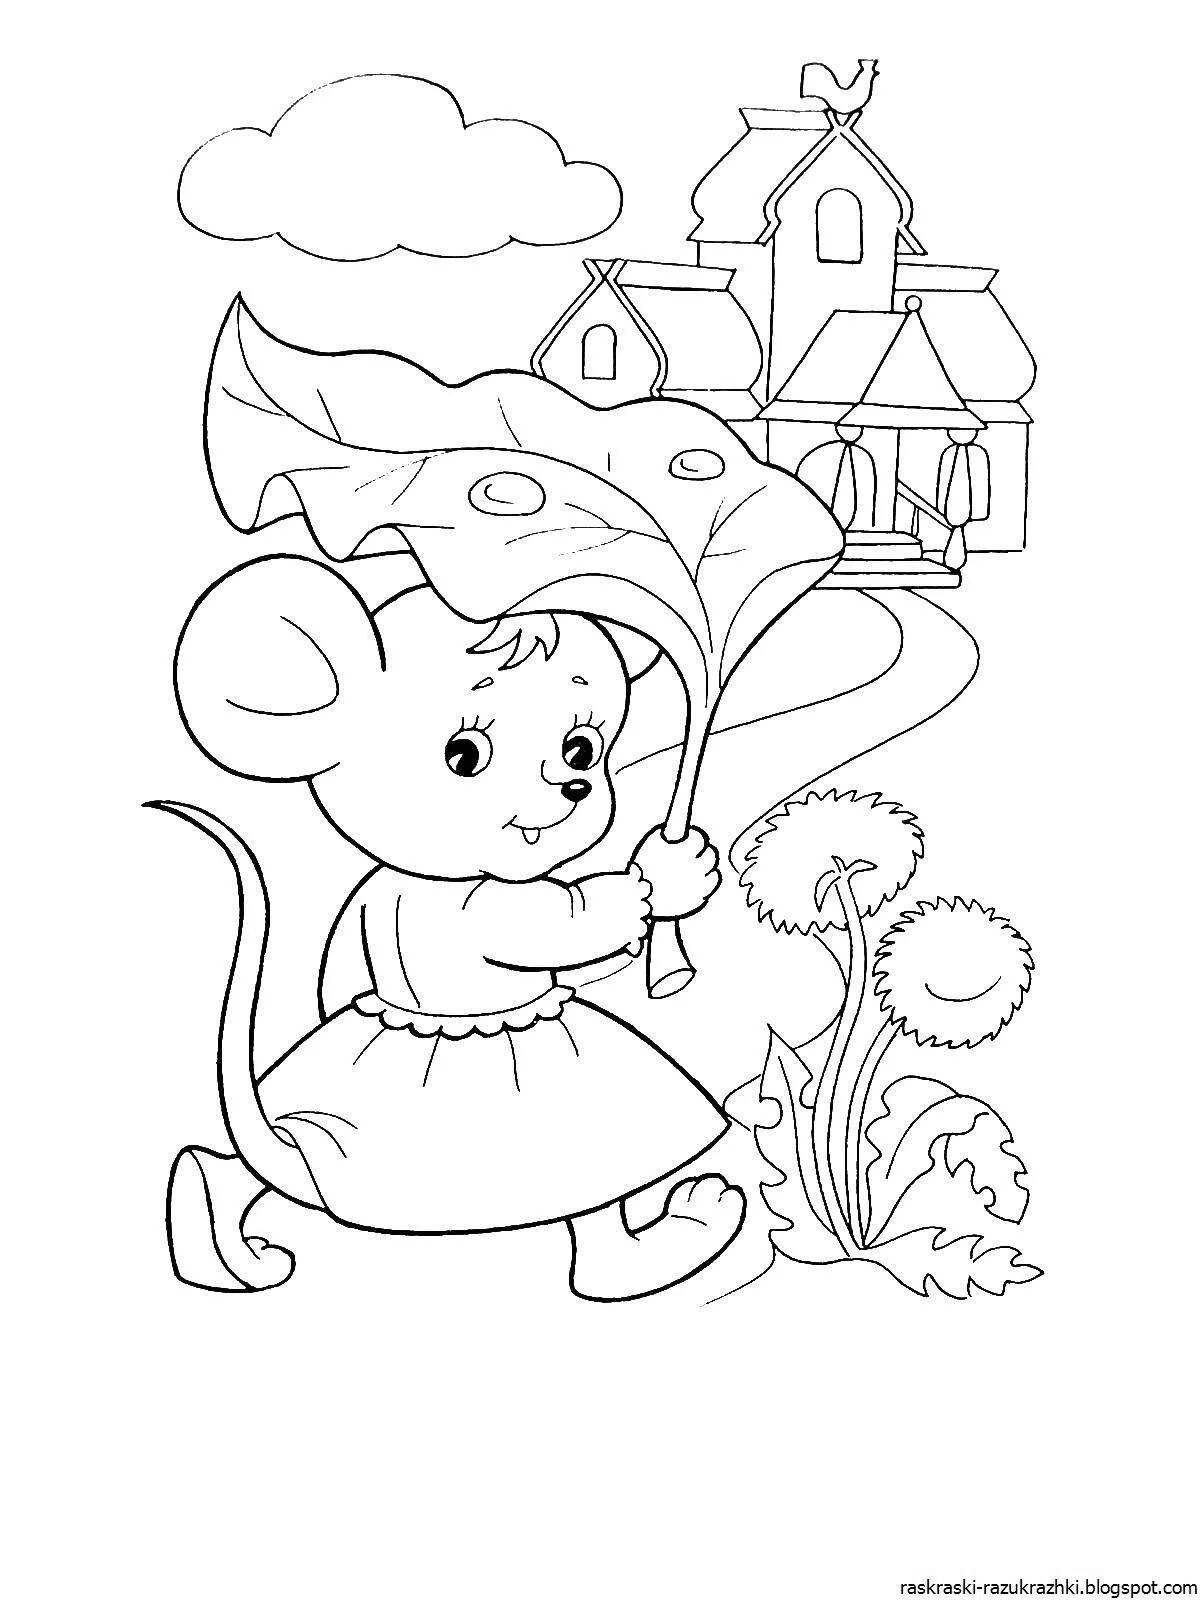 Fairytale house coloring book for kids